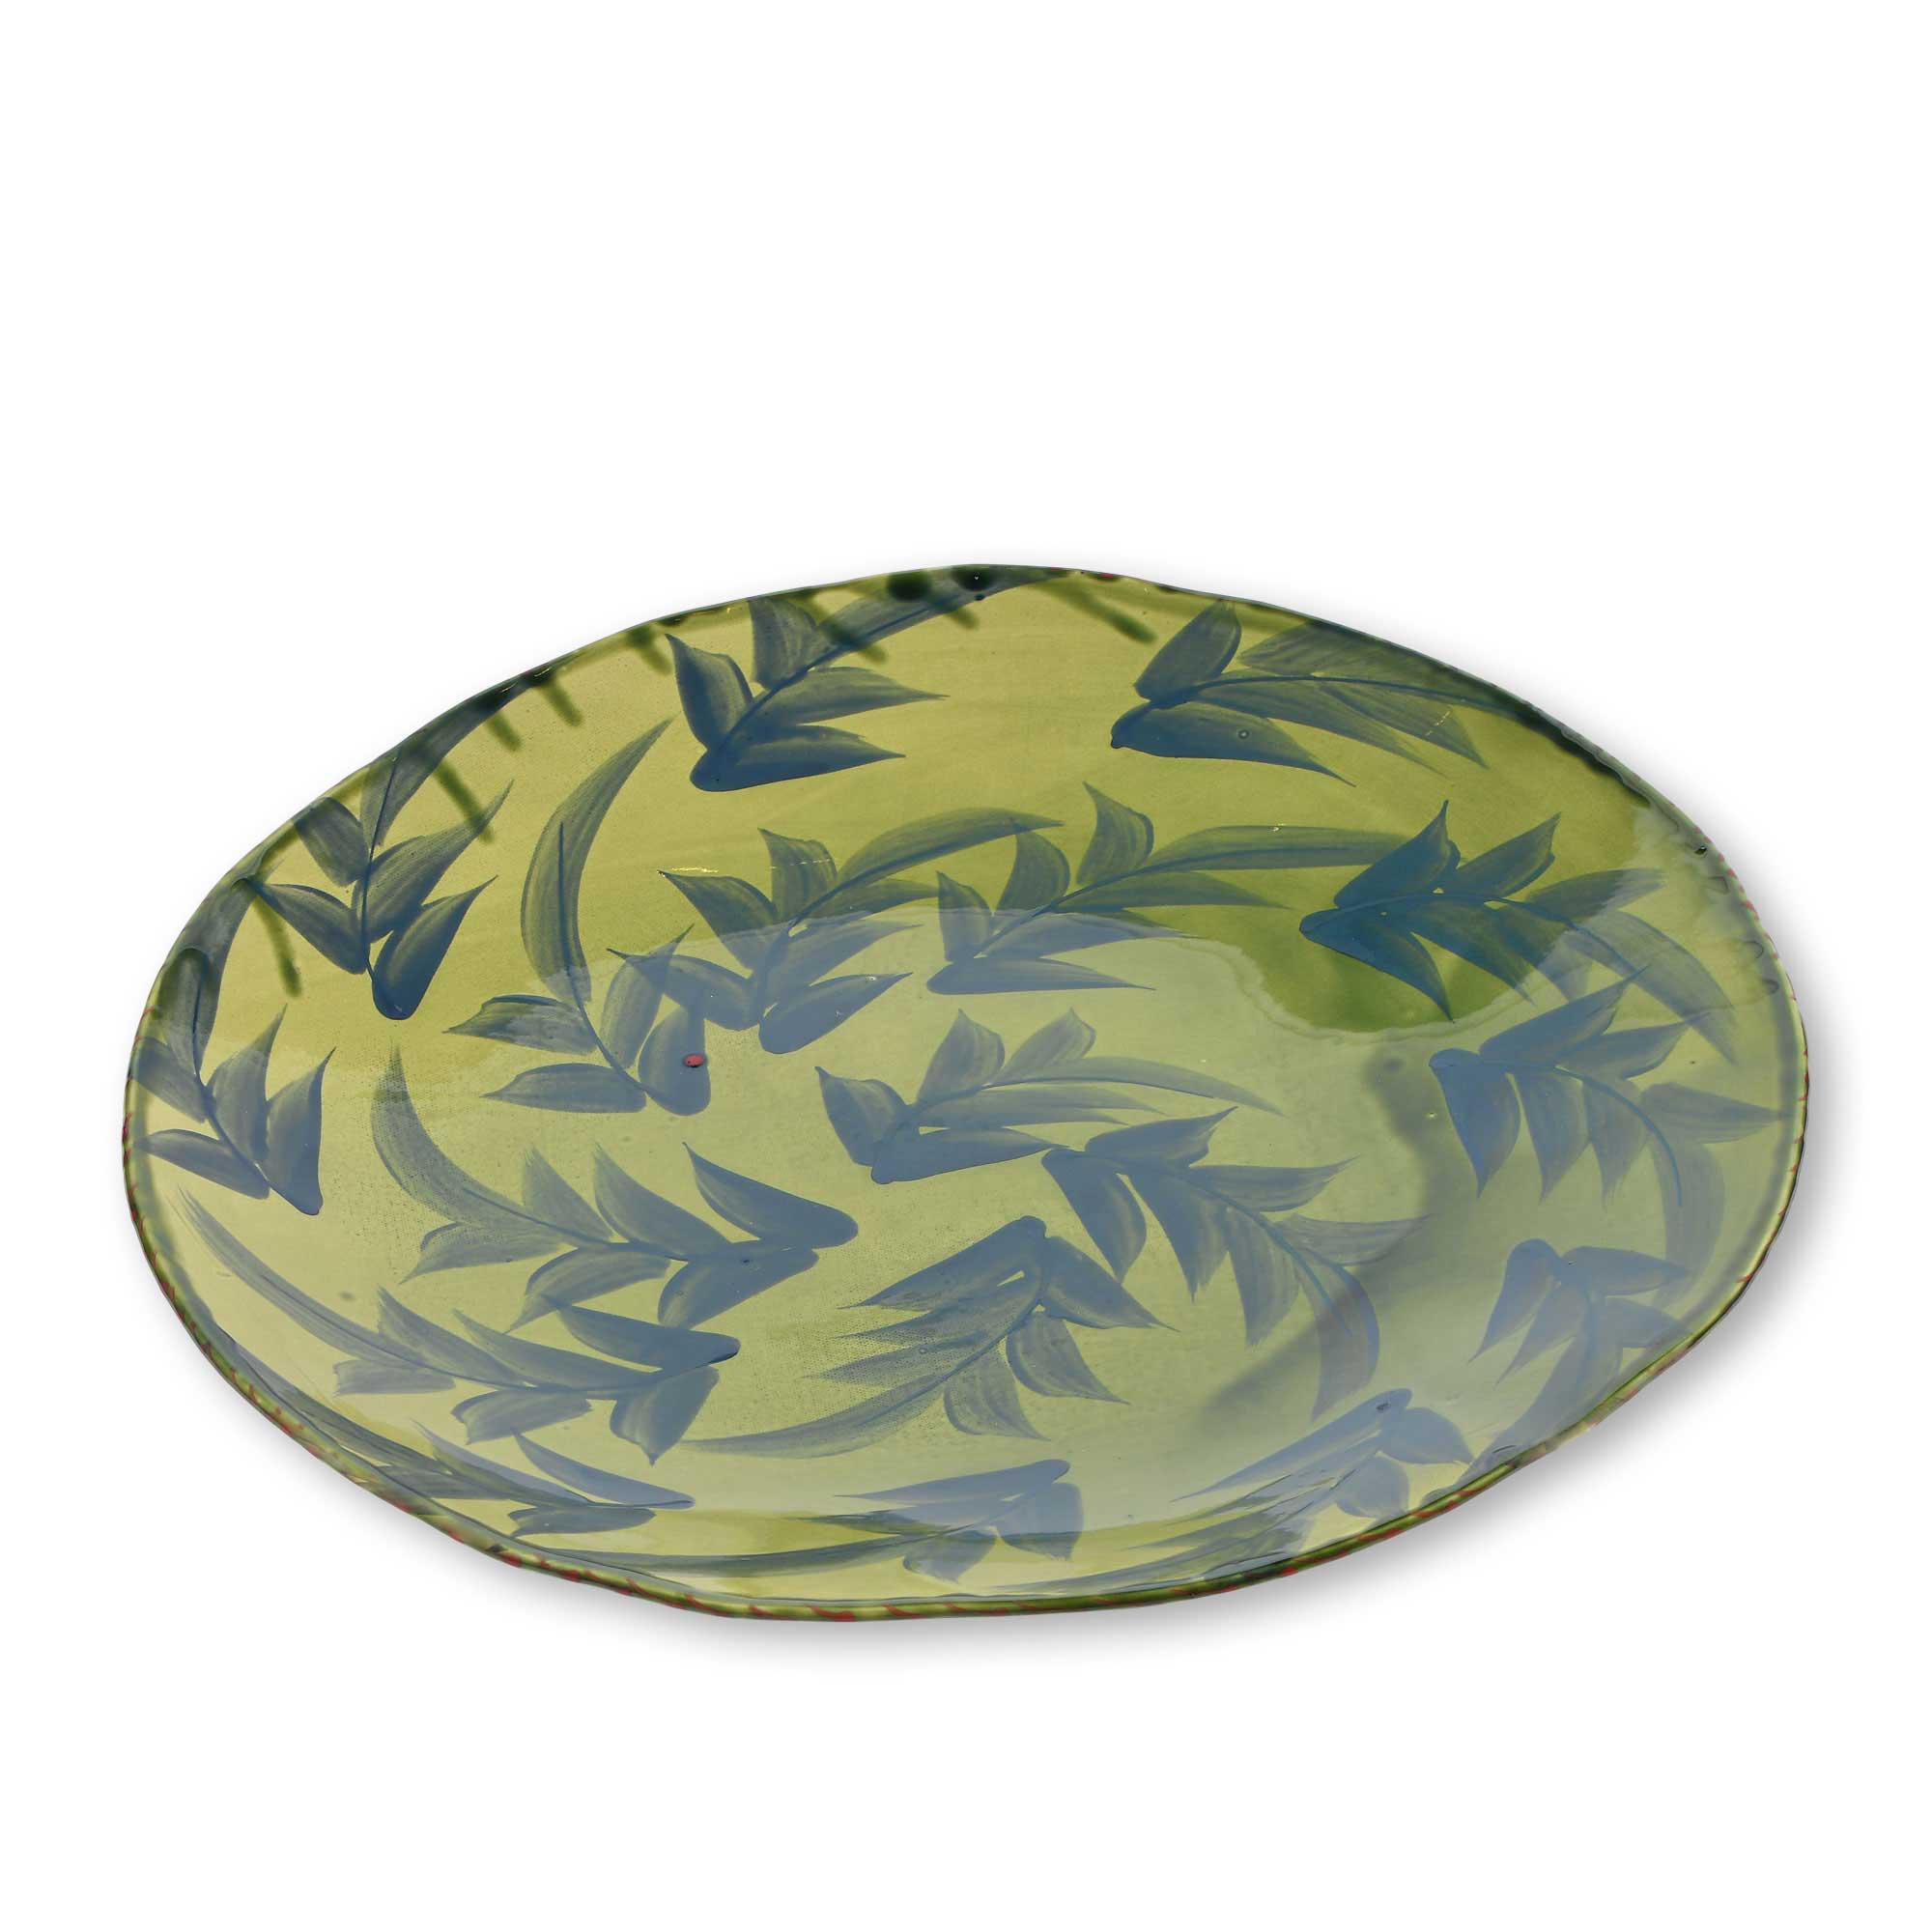 Ceramic%20Round%20Serving%20Dish%20With%20Blue%20Leaves%20Motifs%20on%20Green%20Background image 1